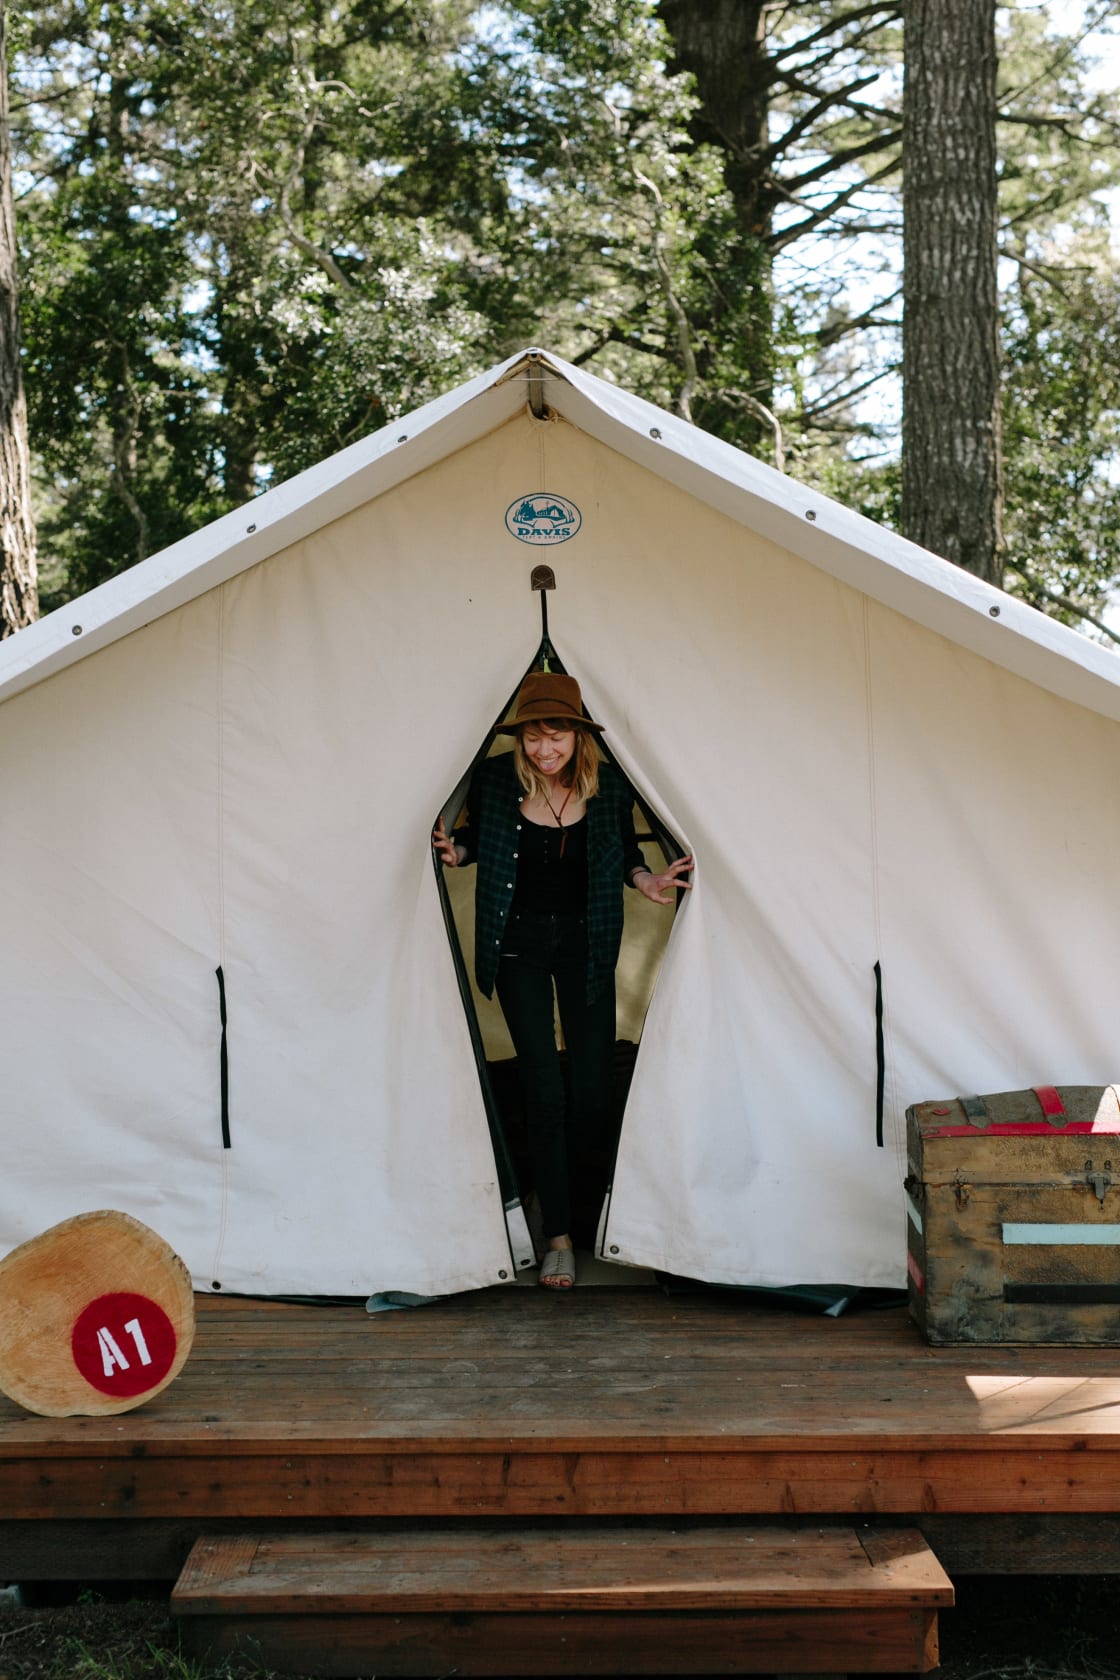 We took a walk around the property and found an empty tent to peek in. You can also rent these out! They are super cozy with a bed! Not in the pitch your own tent area - but are available to reserve on the property.